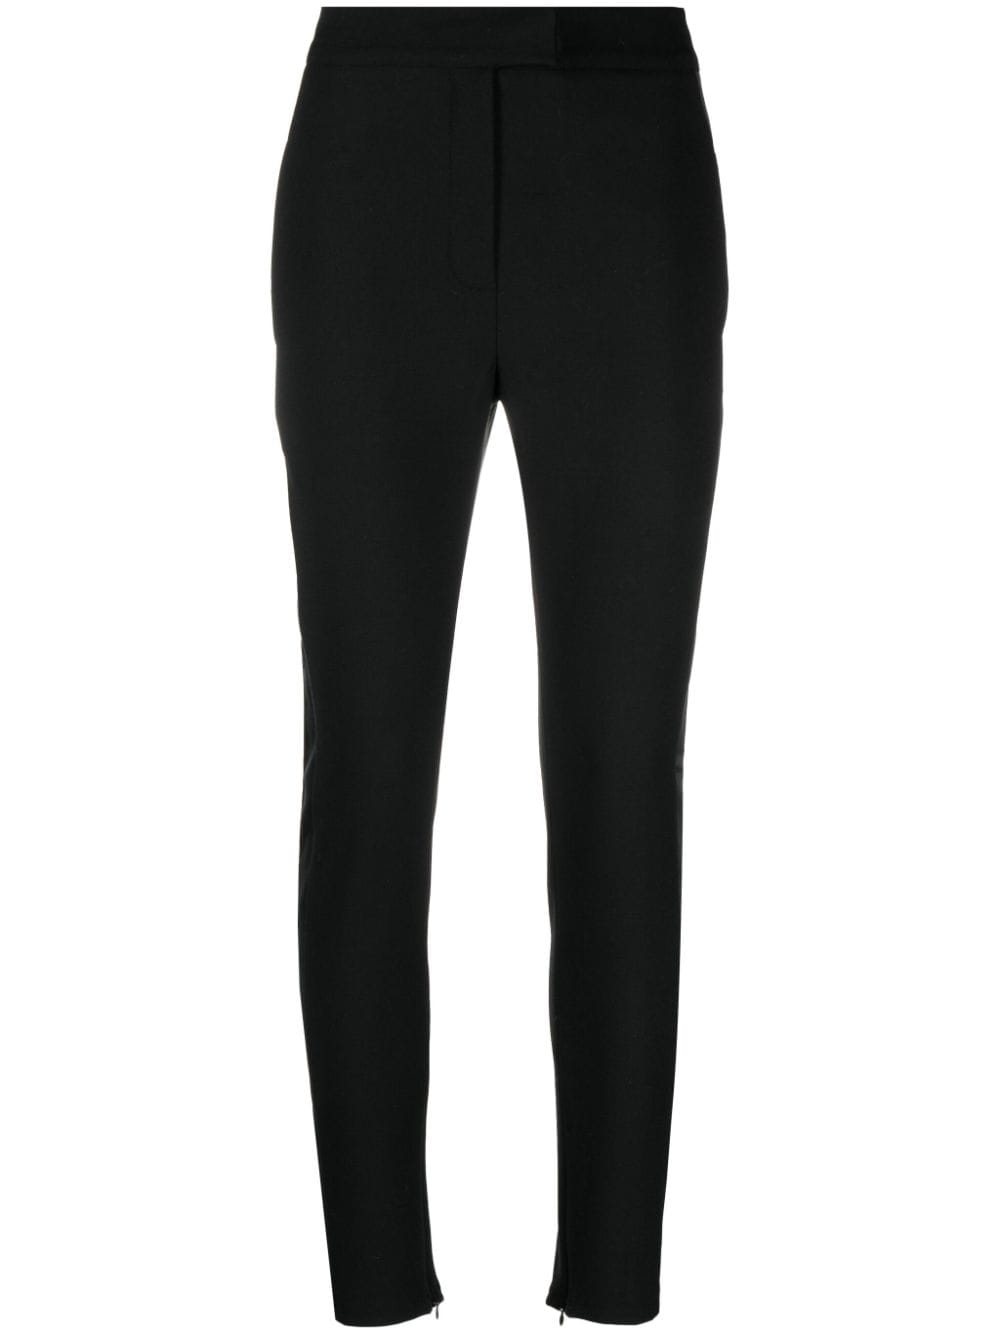 PNK tapered cropped trousers - Black von PNK